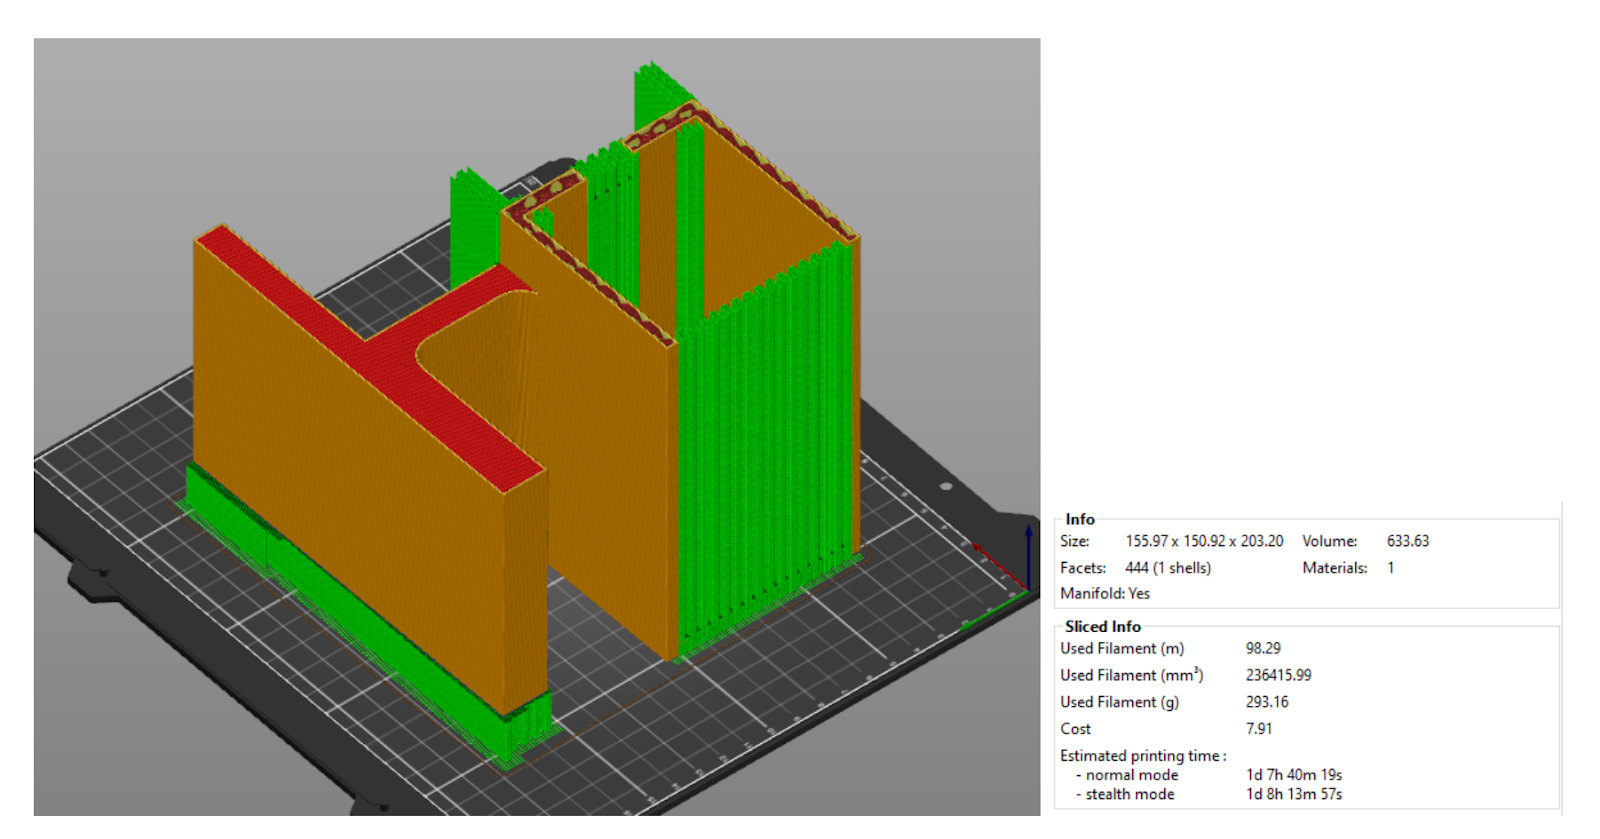 Figure 16: First iteration printing specs and 3D rendering